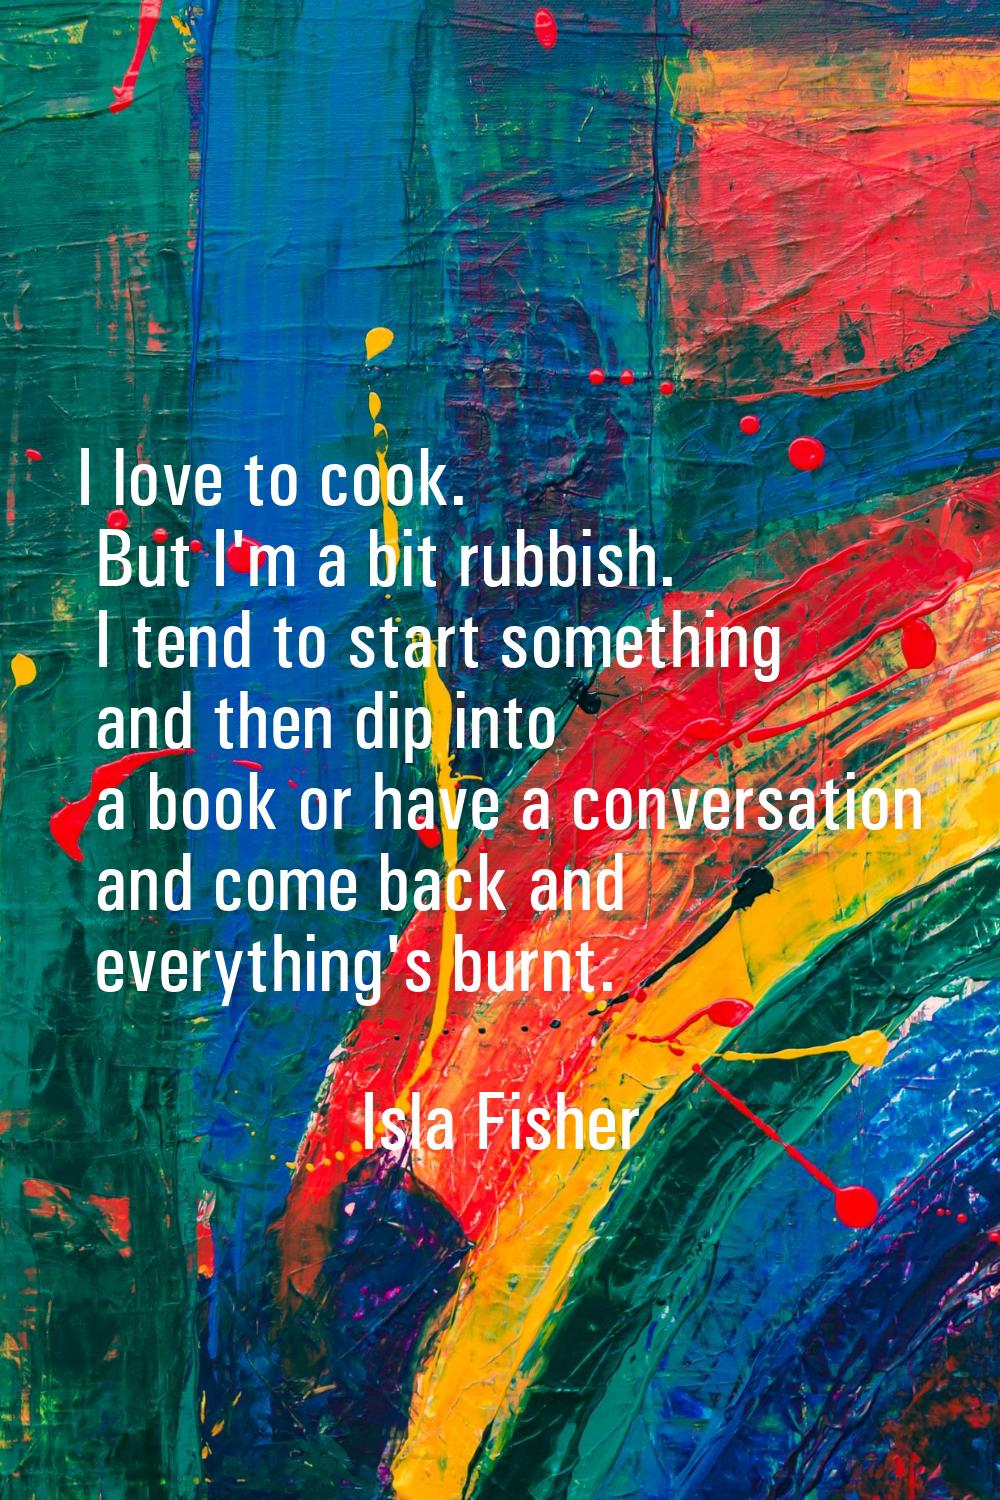 I love to cook. But I'm a bit rubbish. I tend to start something and then dip into a book or have a